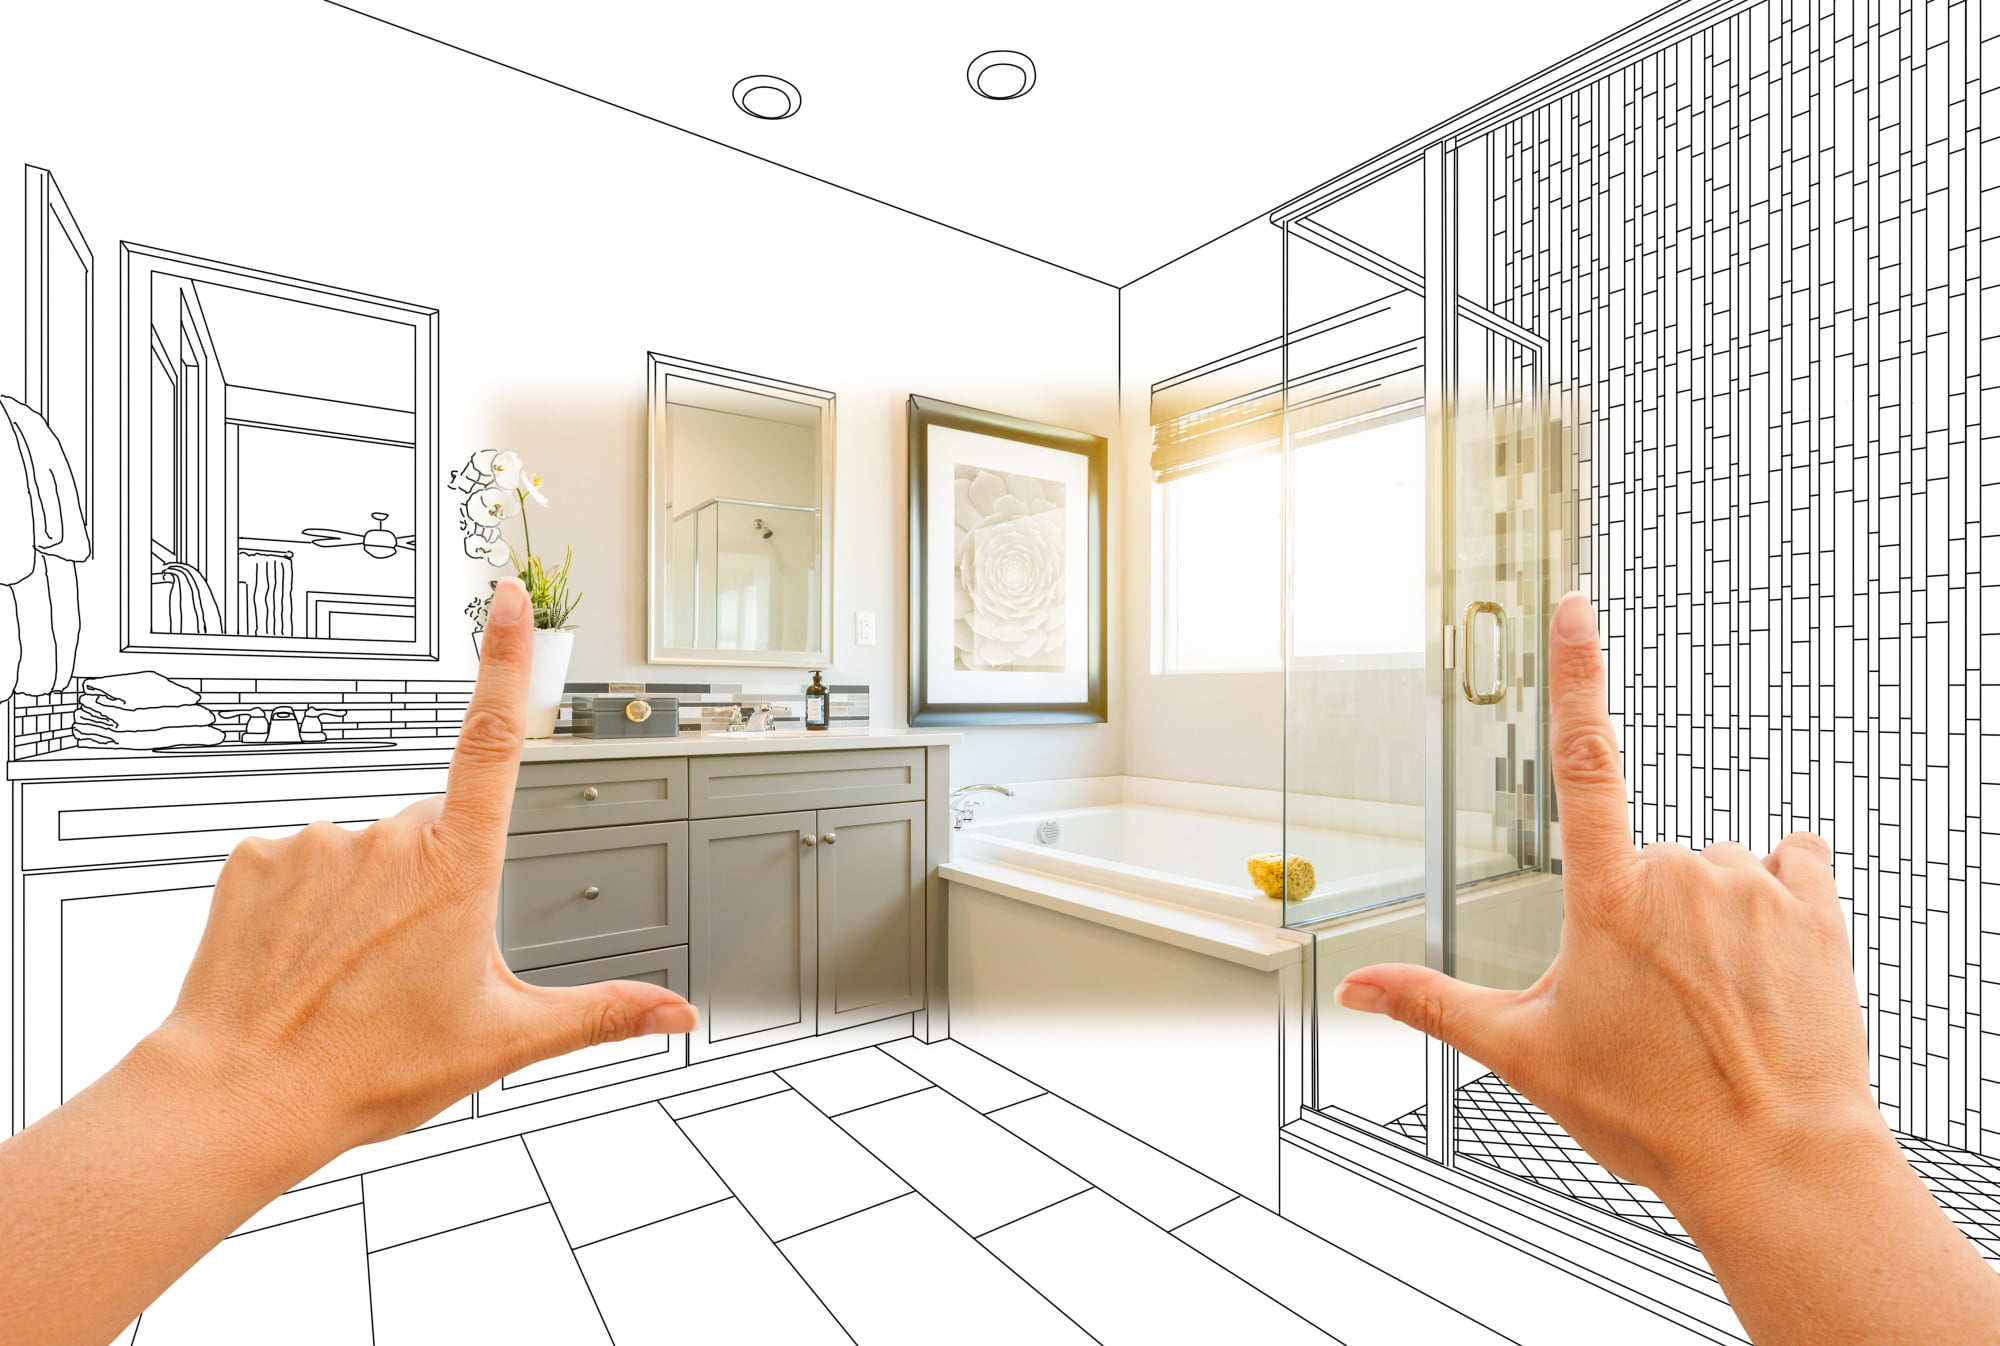 Finding the right people to remodel your bathroom requires knowing your options. Here is what to know about how to choose bathroom remodeling services.